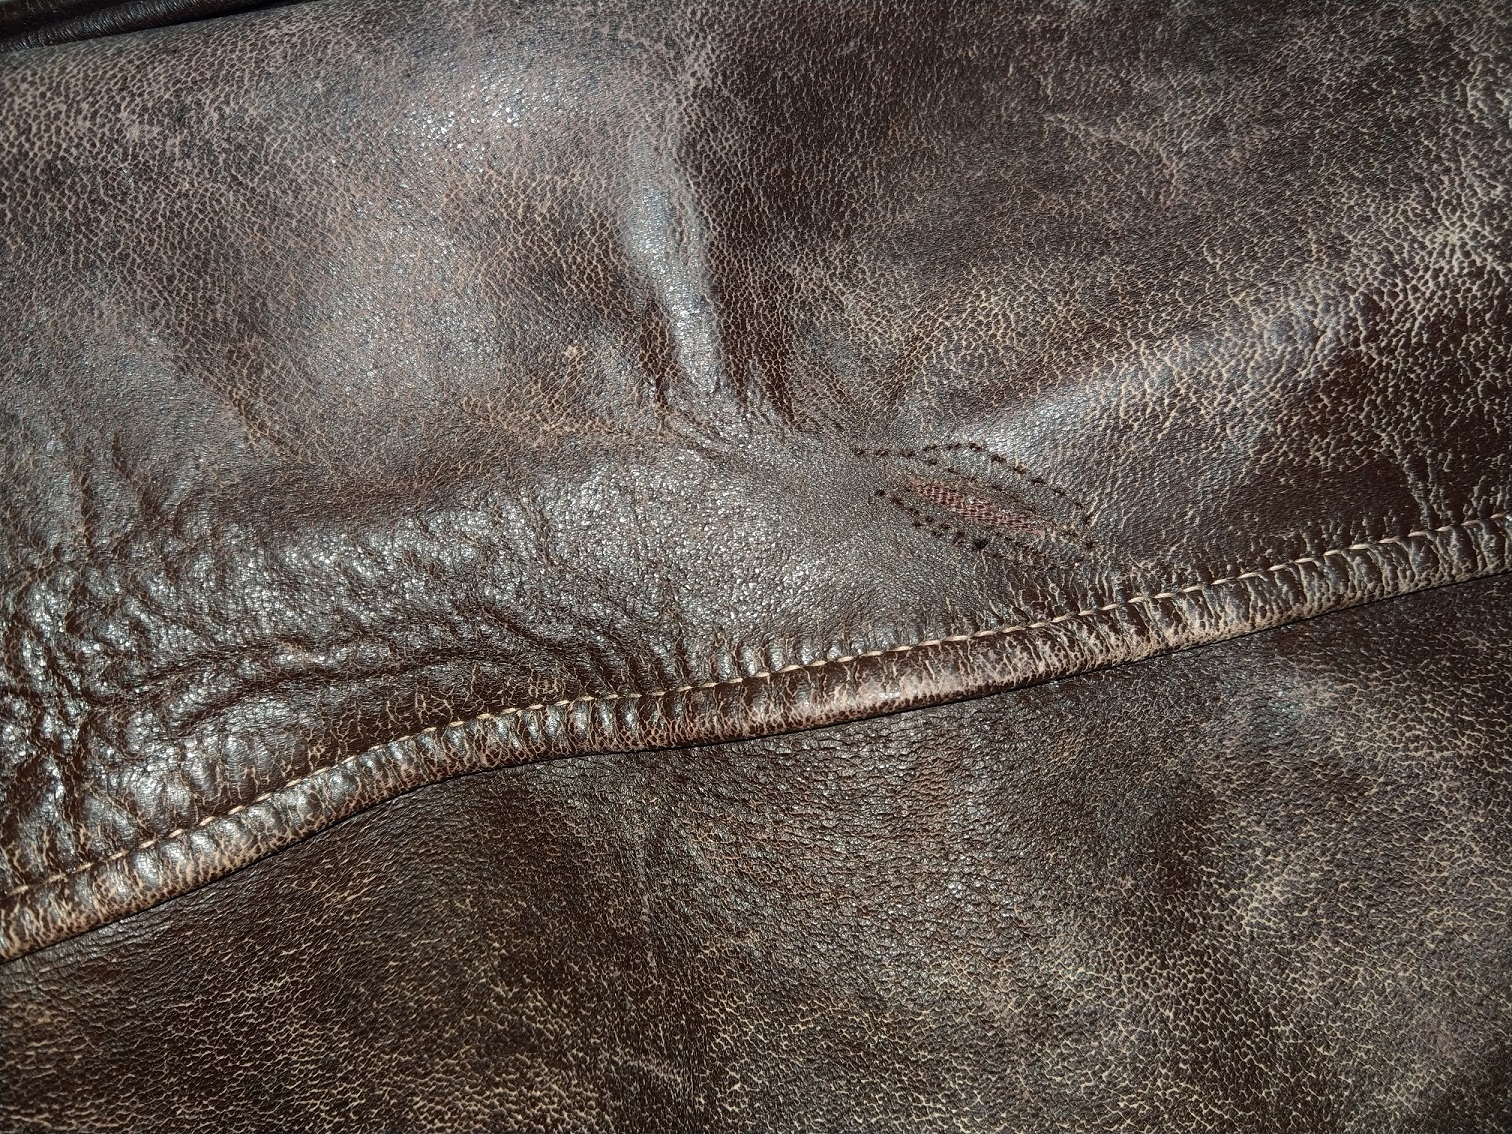 Need advice on reducing puckering on vintage leather jacket | The